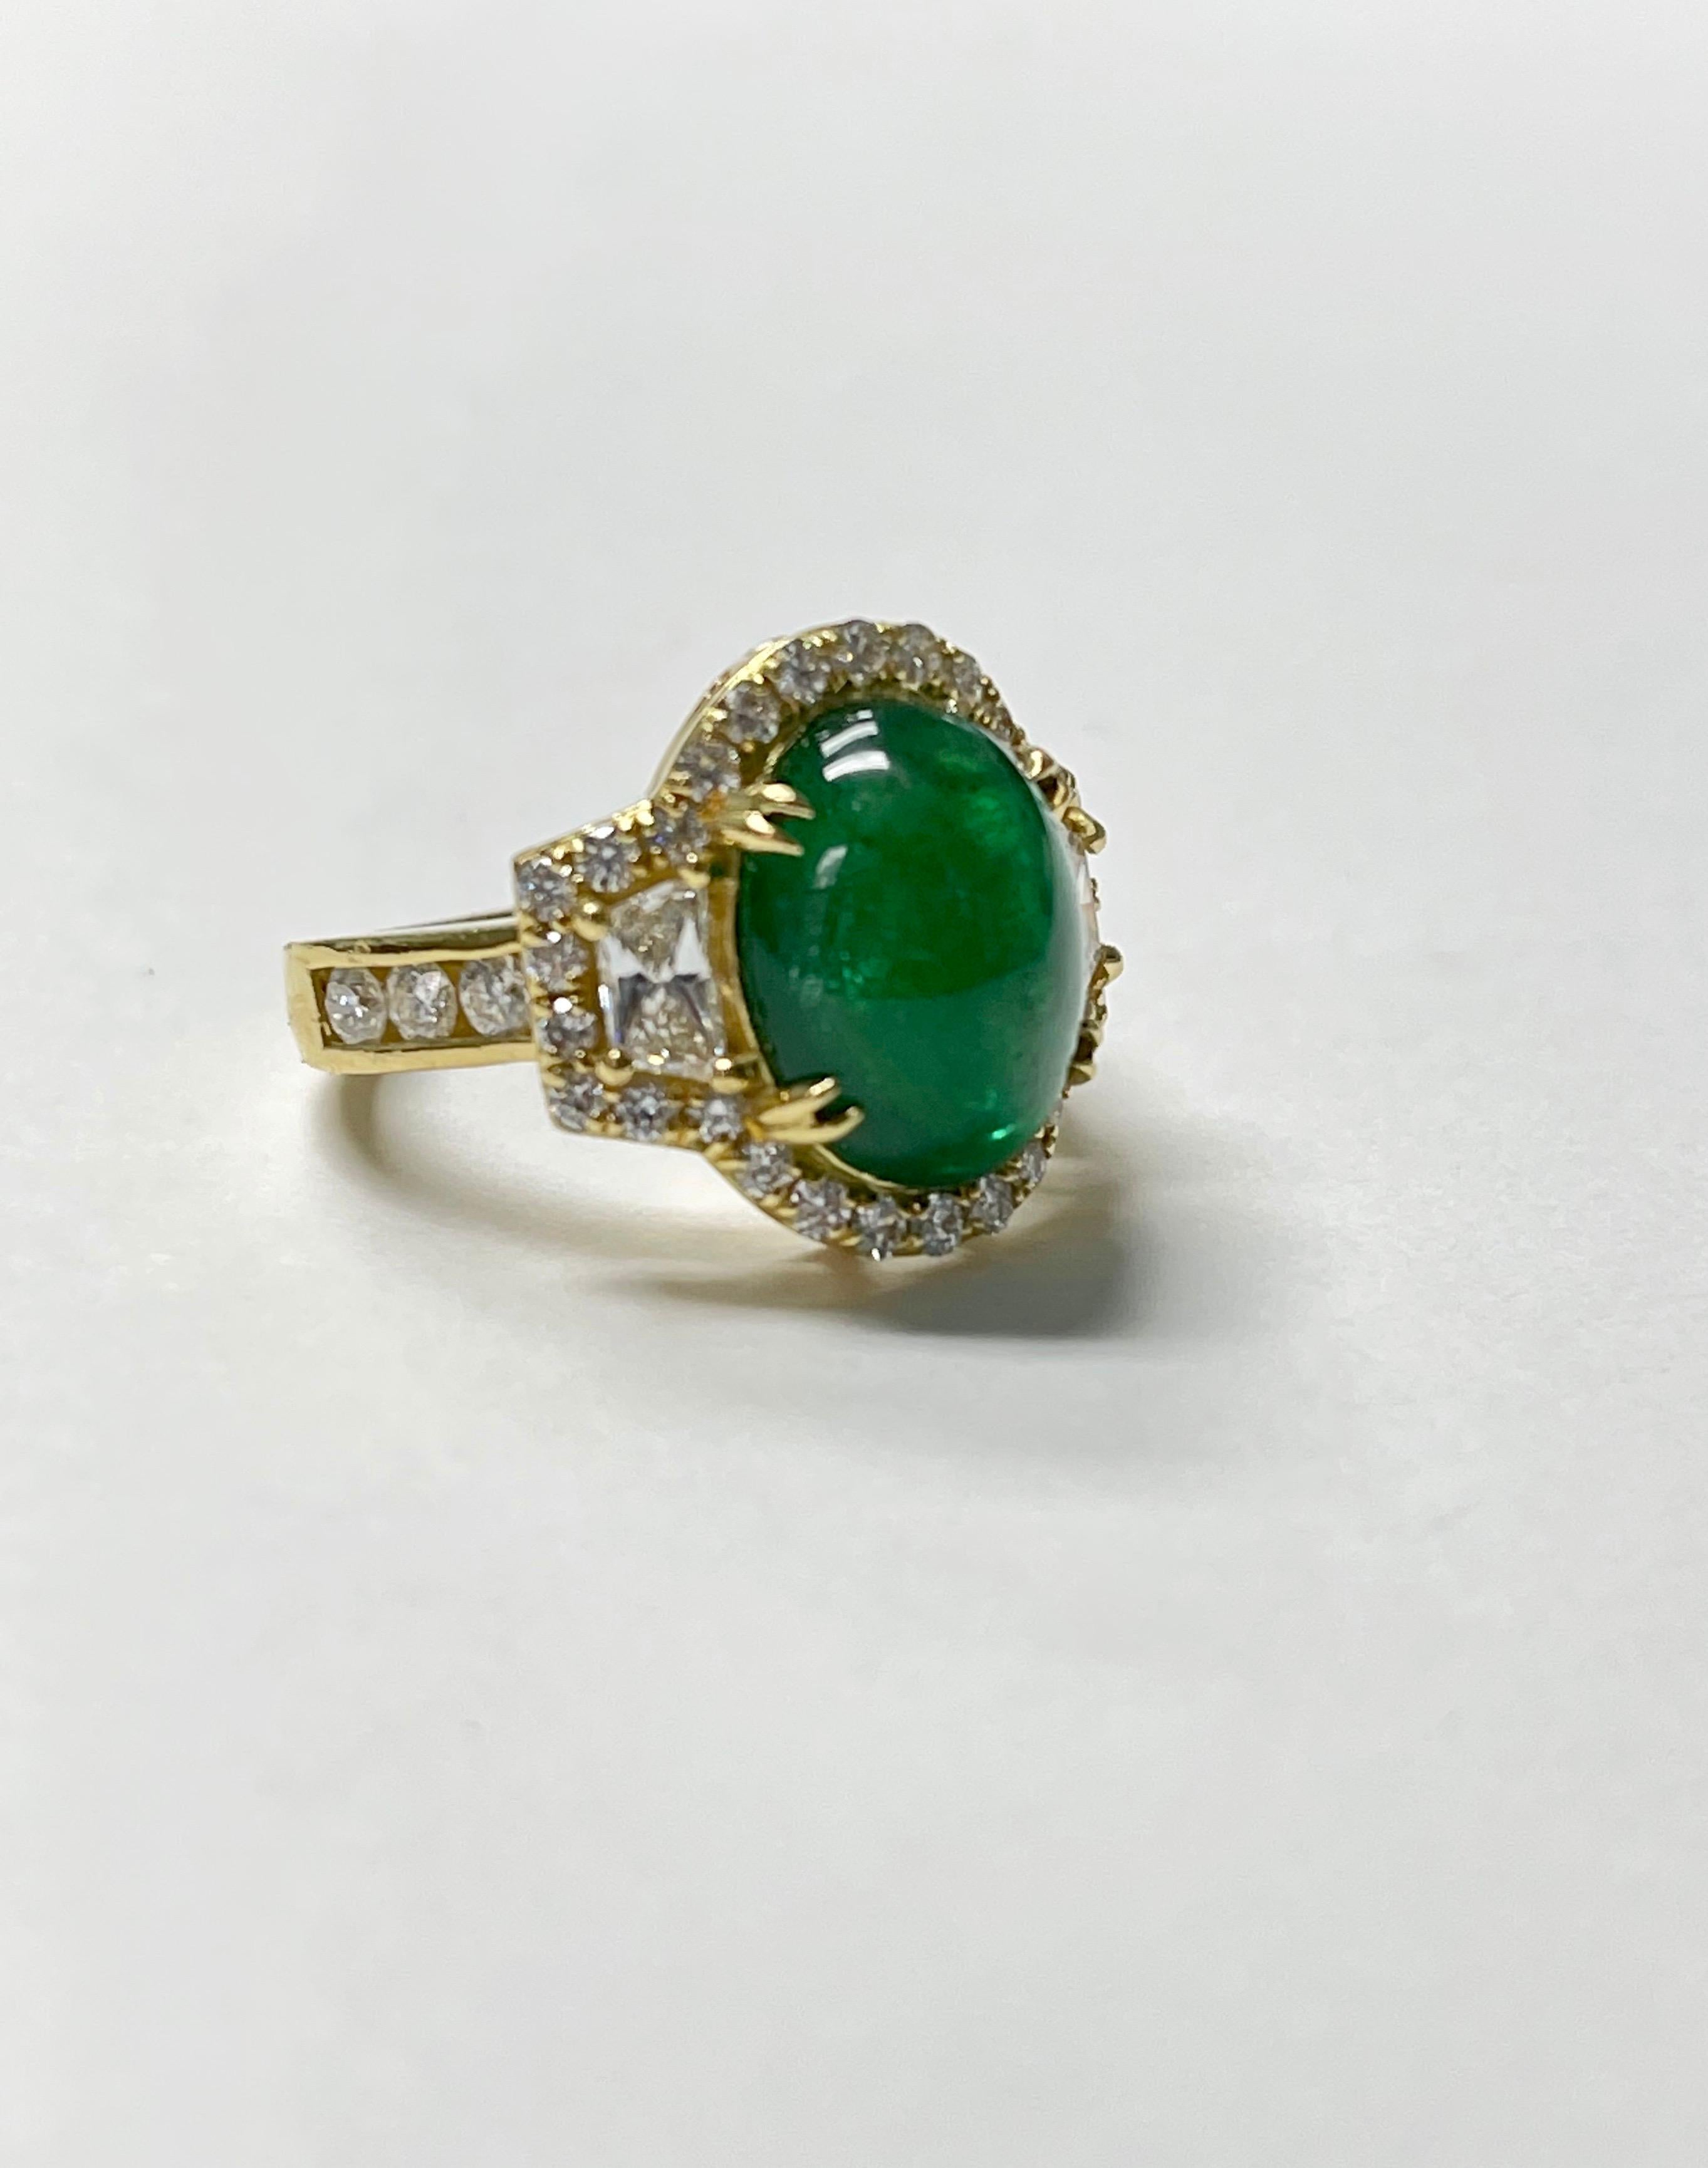 Oval Cut 6.08 Carat Oval Emerald Cabochon Engagement Ring in 18K Yellow Gold For Sale